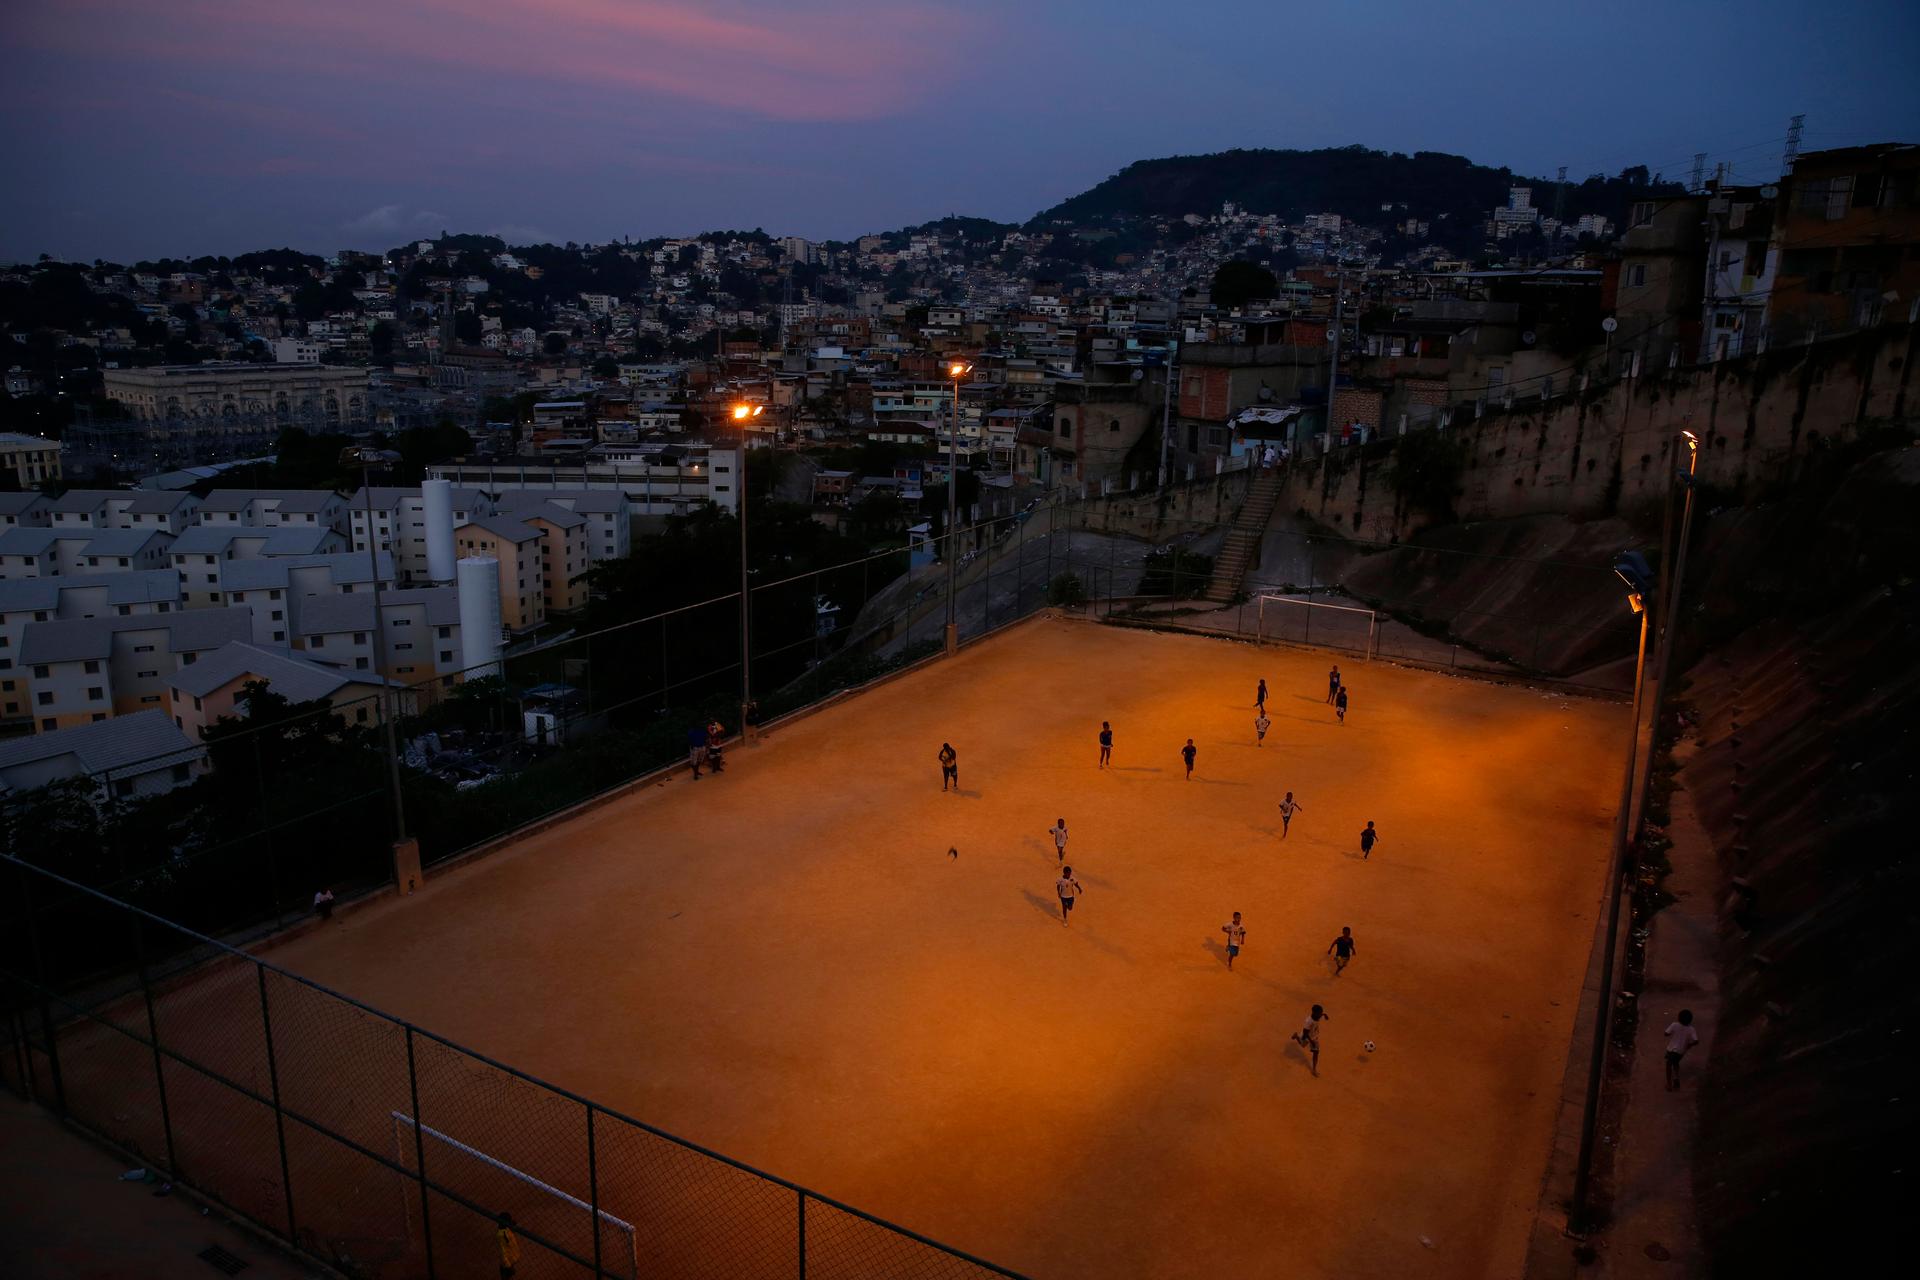 Kids play soccer during a training session at Sao Carlos slum in Rio de Janeiro May 15, 2014.